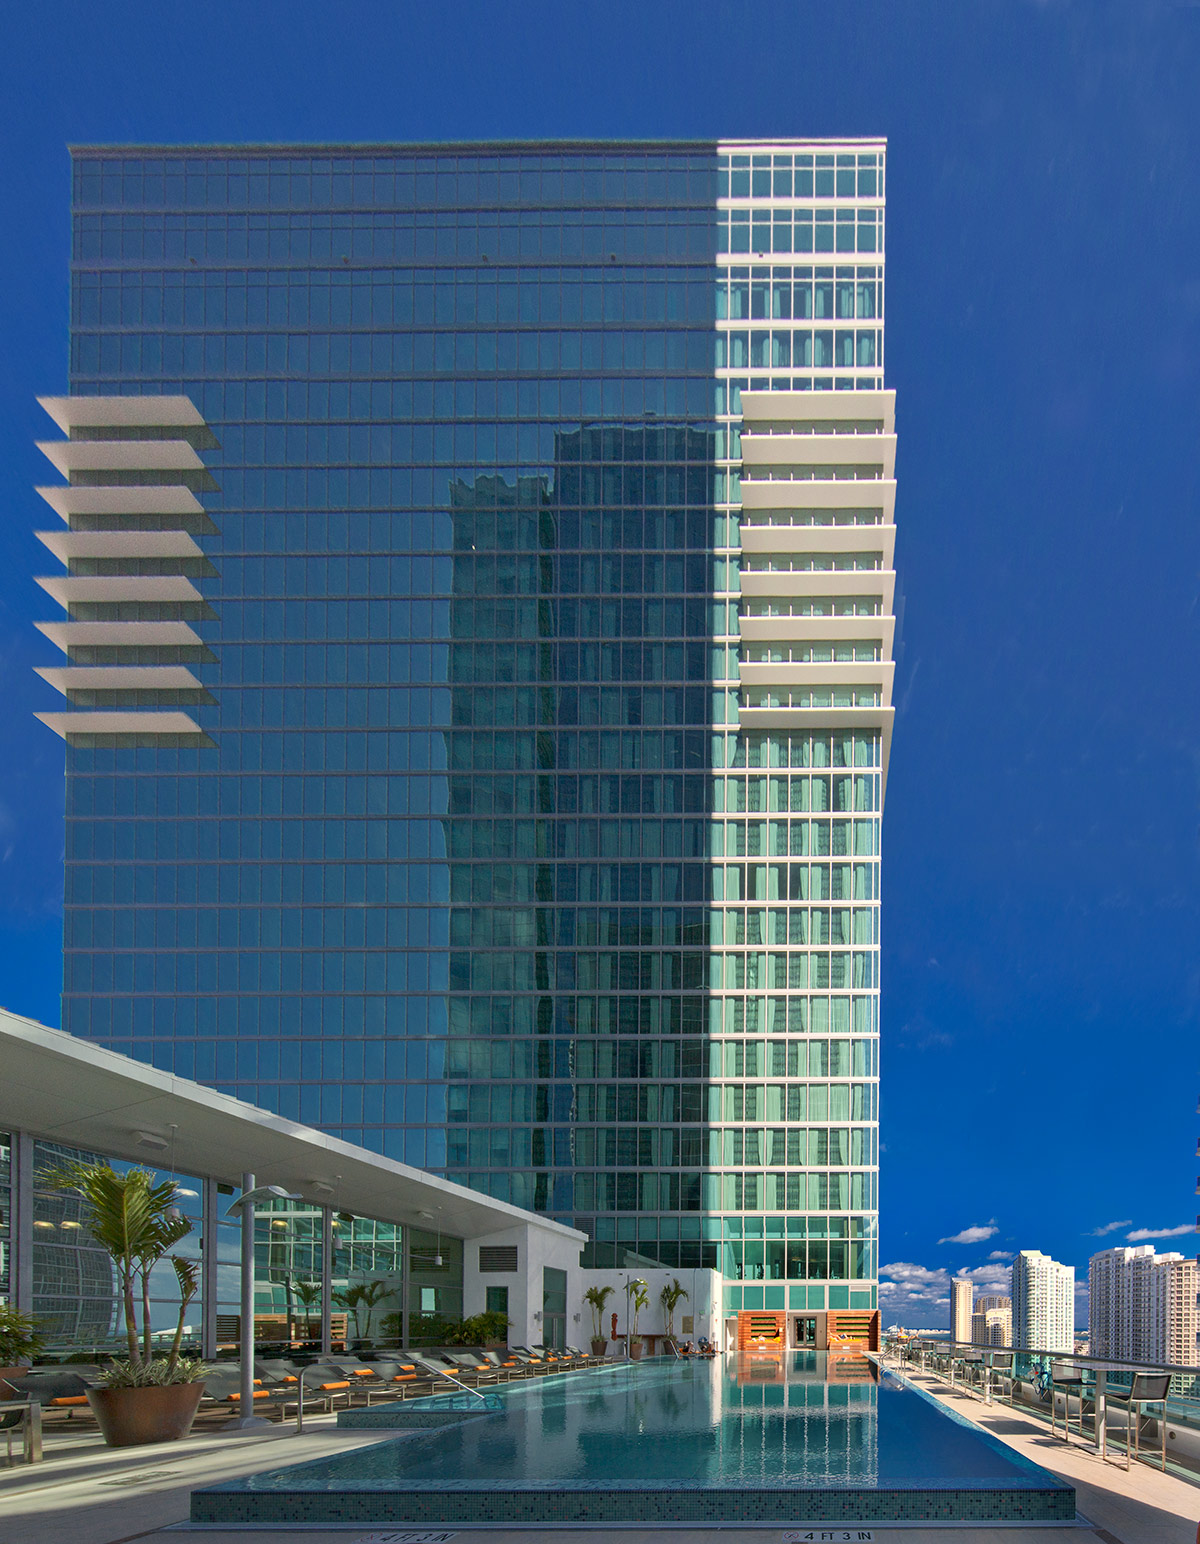 Pool View of the JW Marriott Marquis in downtown Miami provides a luxury hospitality experience.